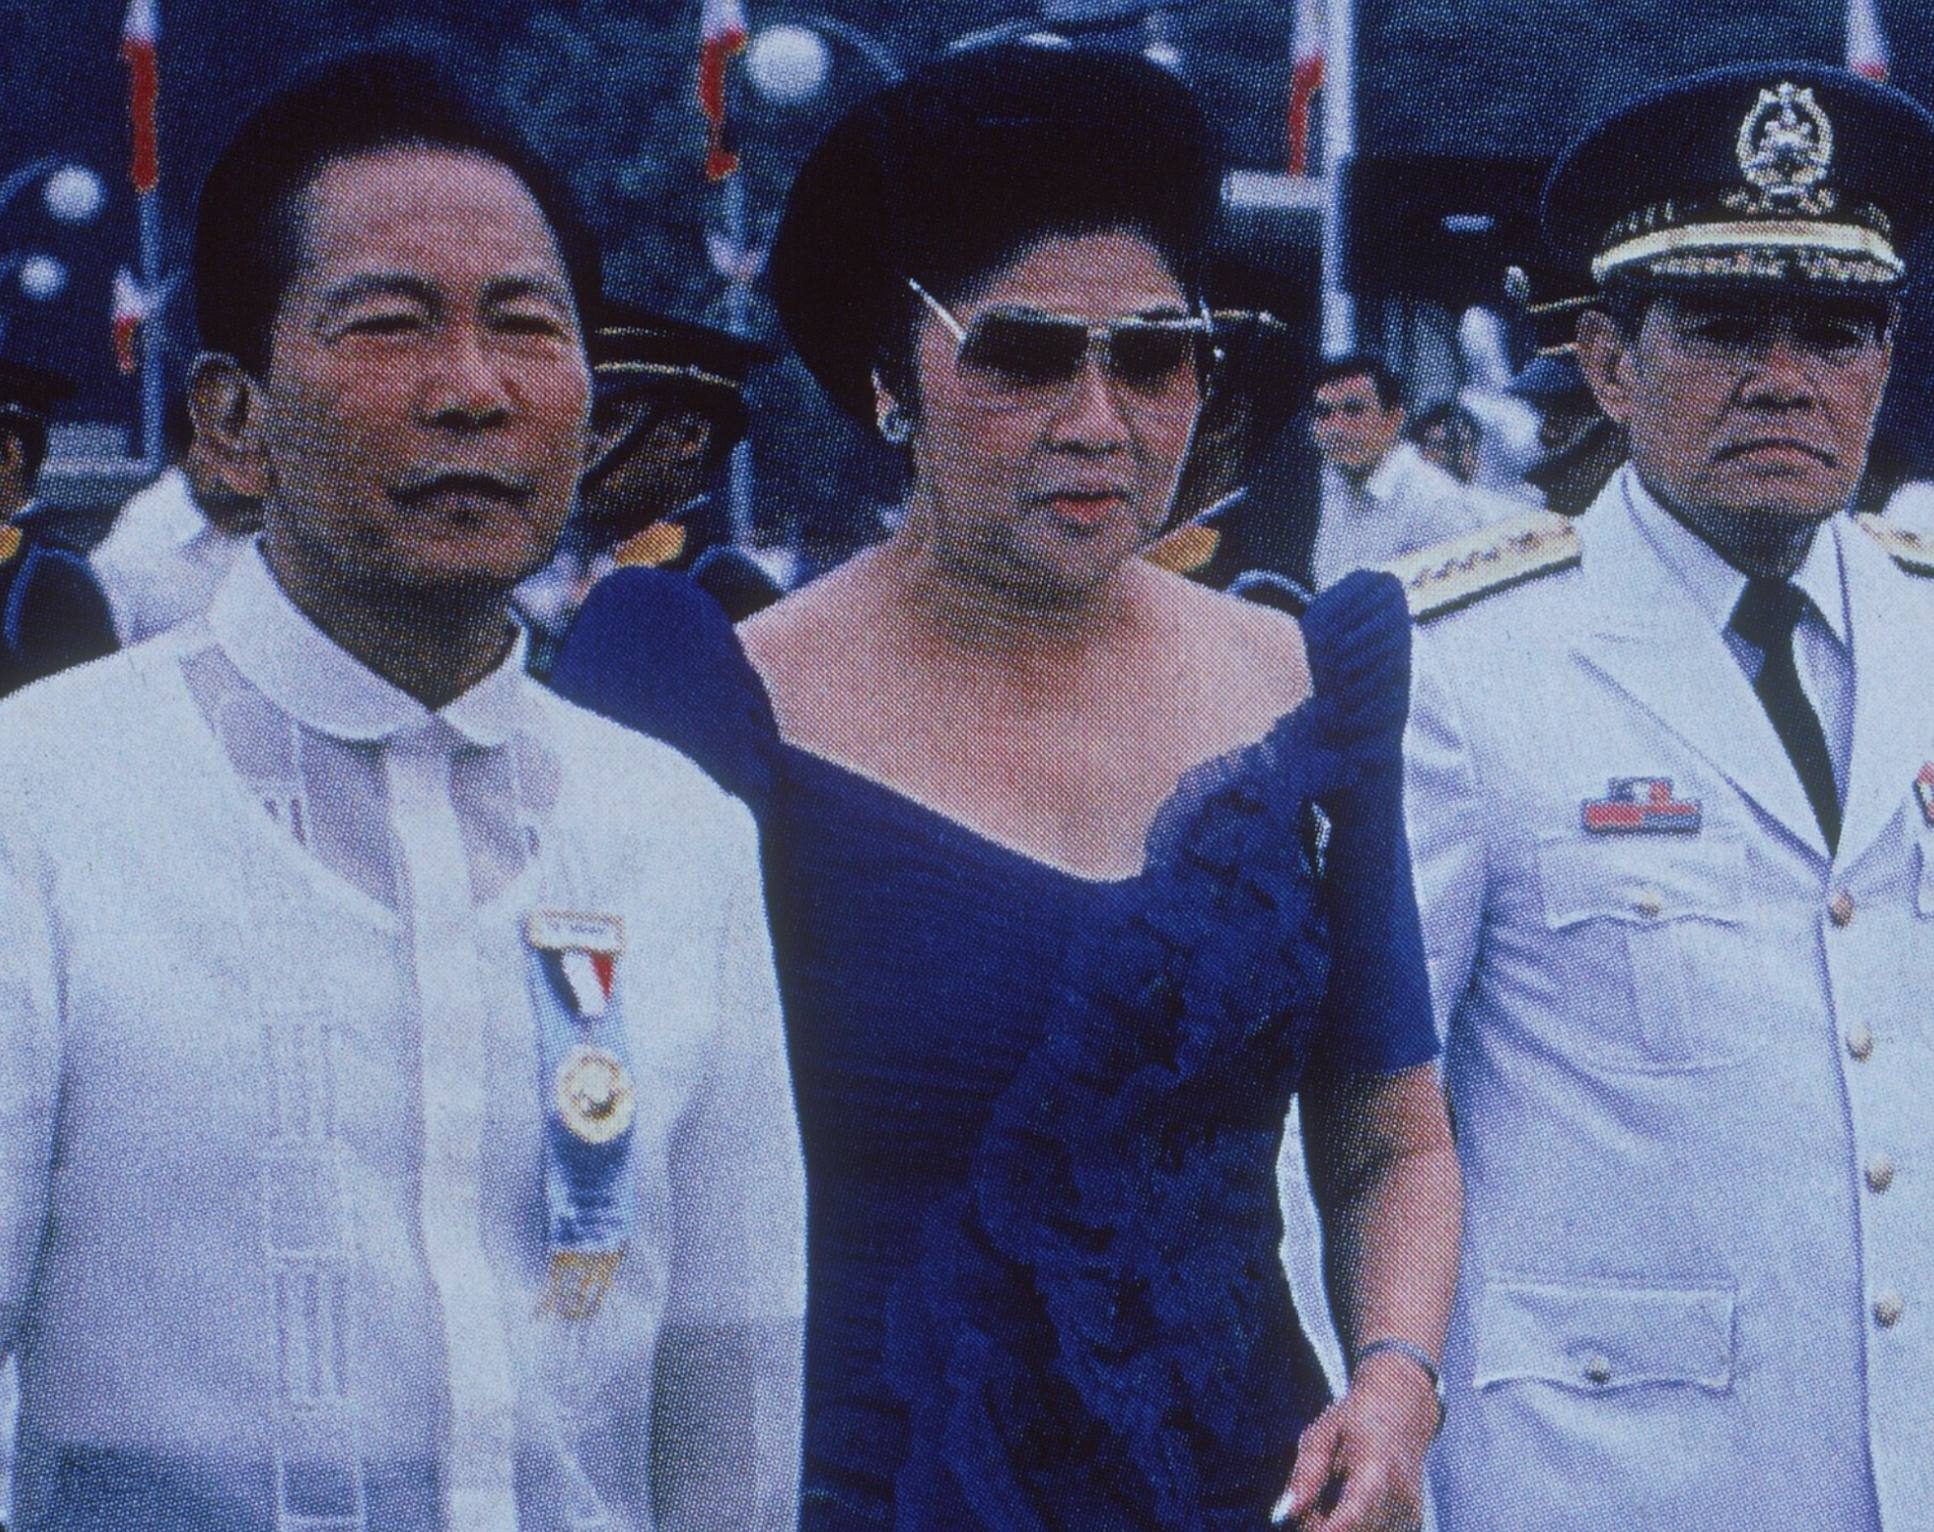 General Ver’s daughter reckons with her father and the legacy of Martial Law